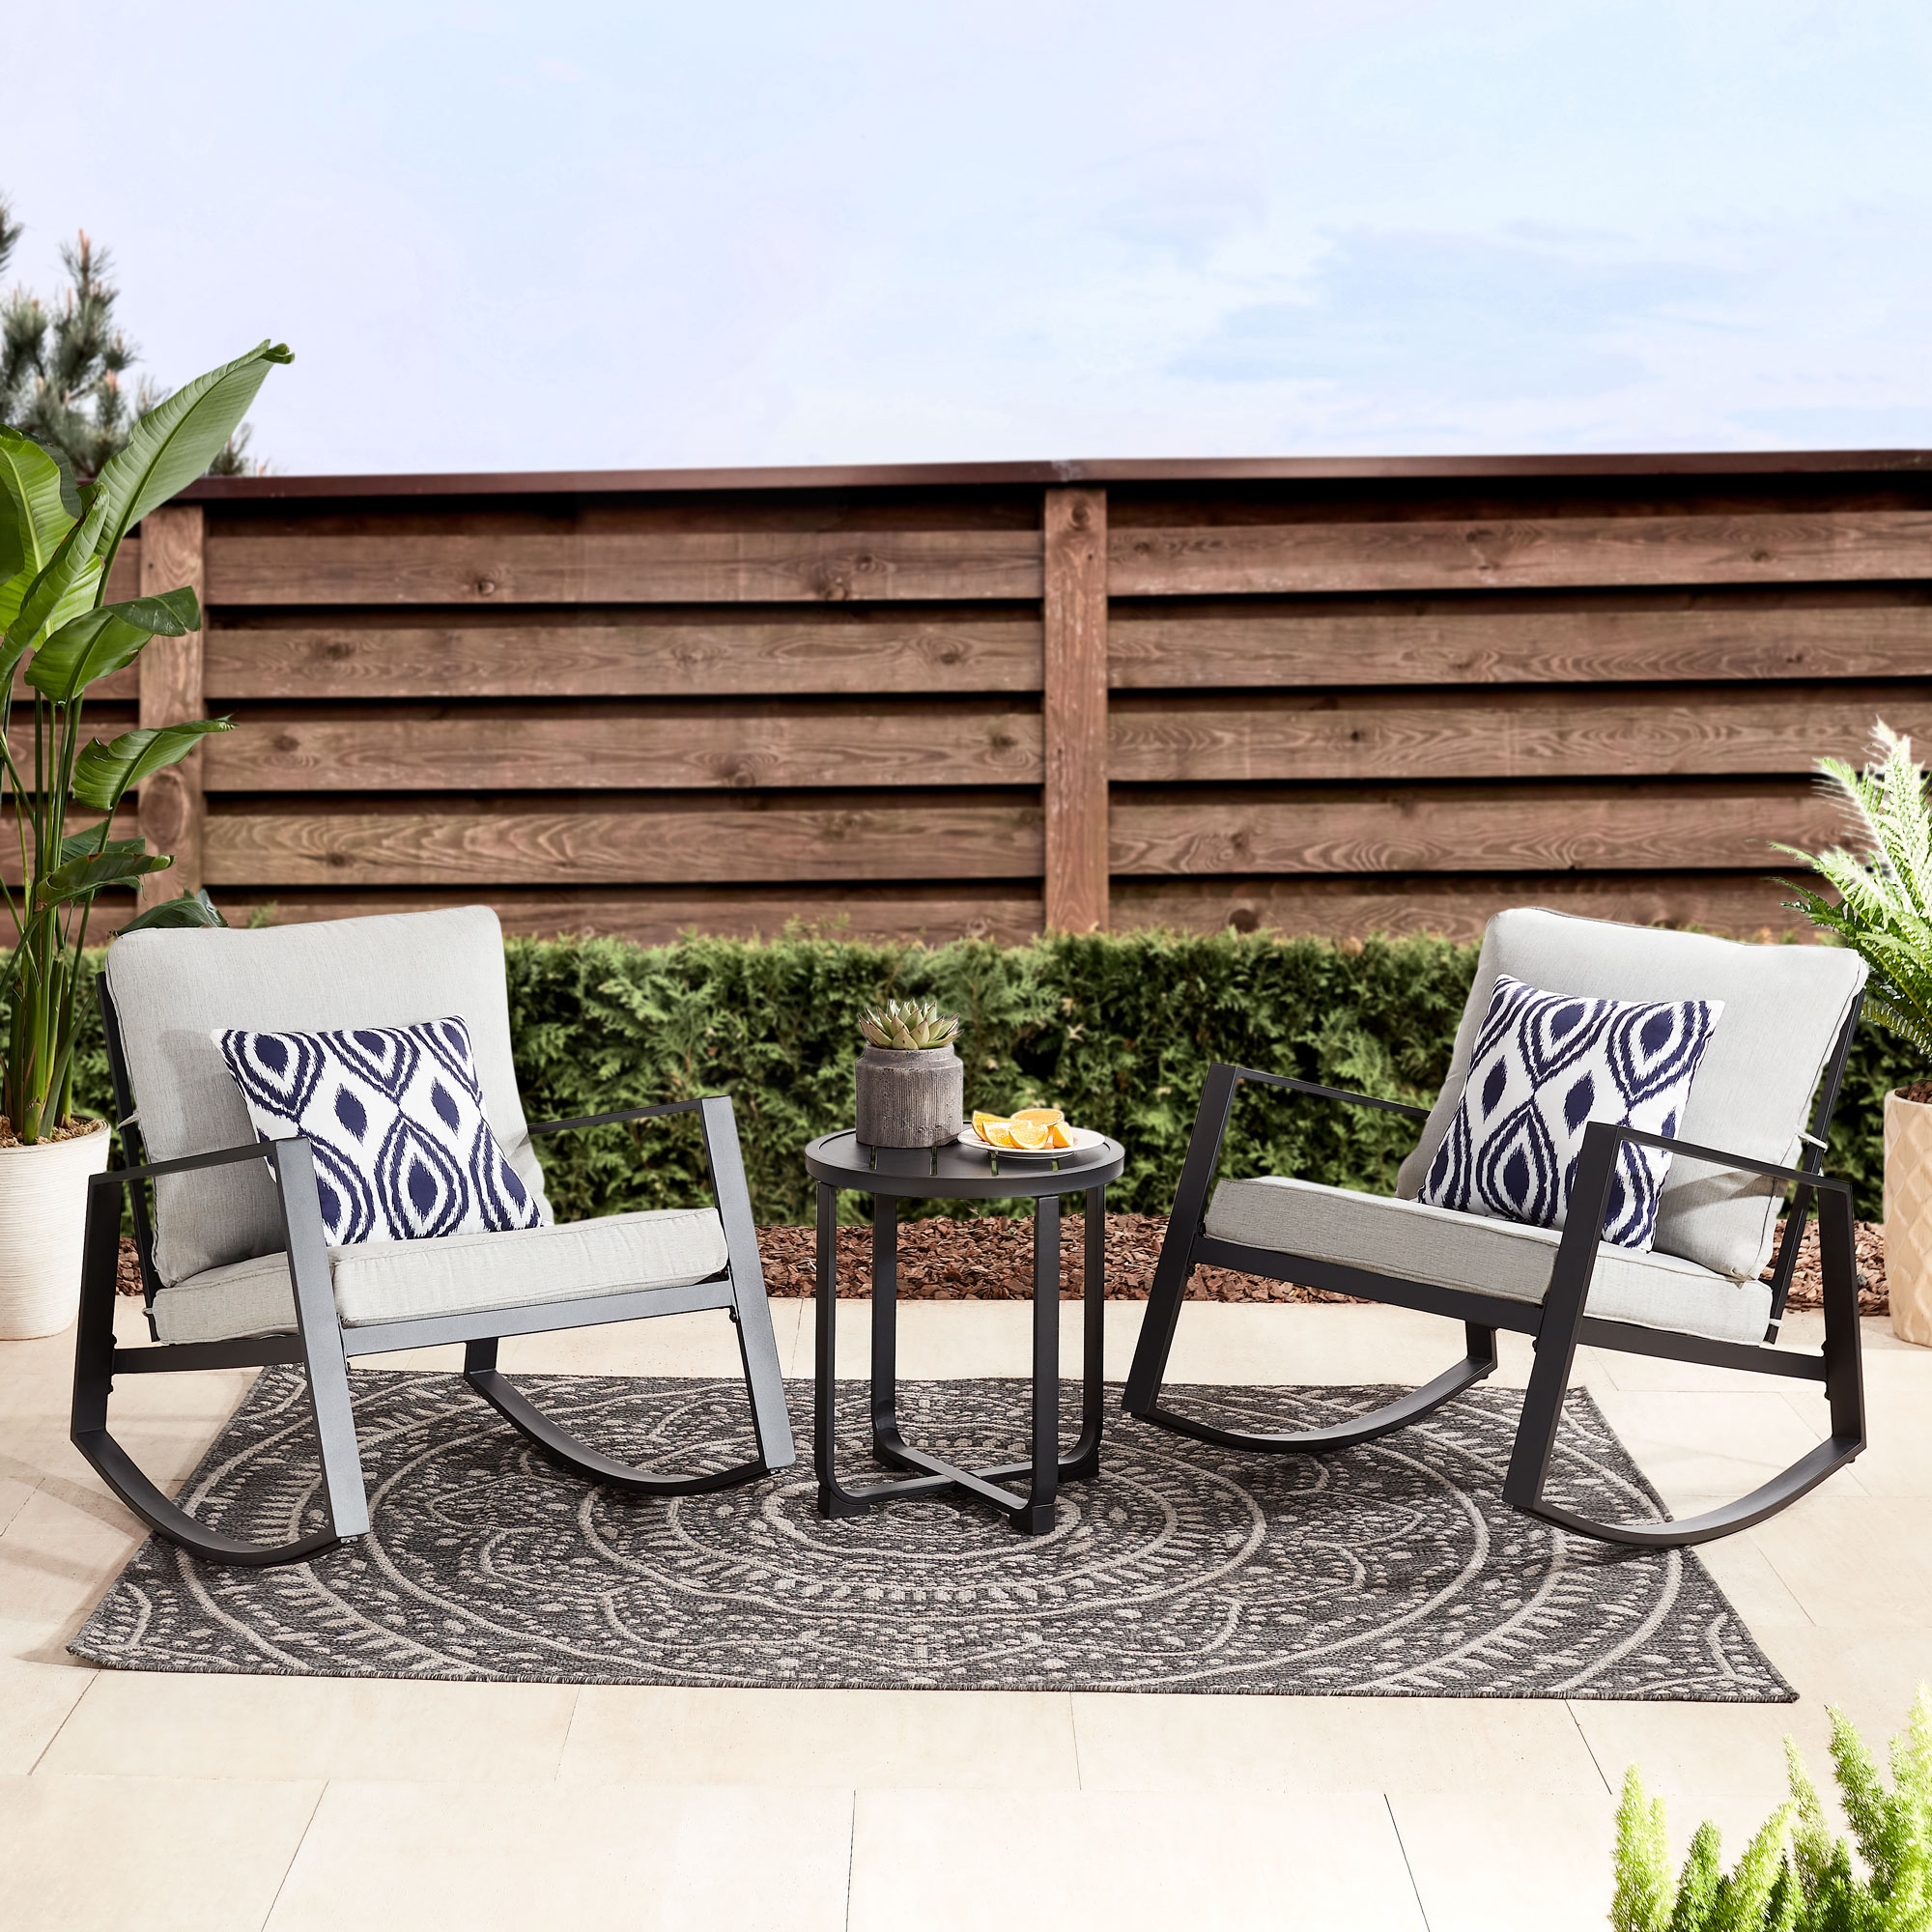 Mainstays Asher Springs 2-Piece Outdoor Furniture Patio Rocker Set -Grey - image 1 of 8